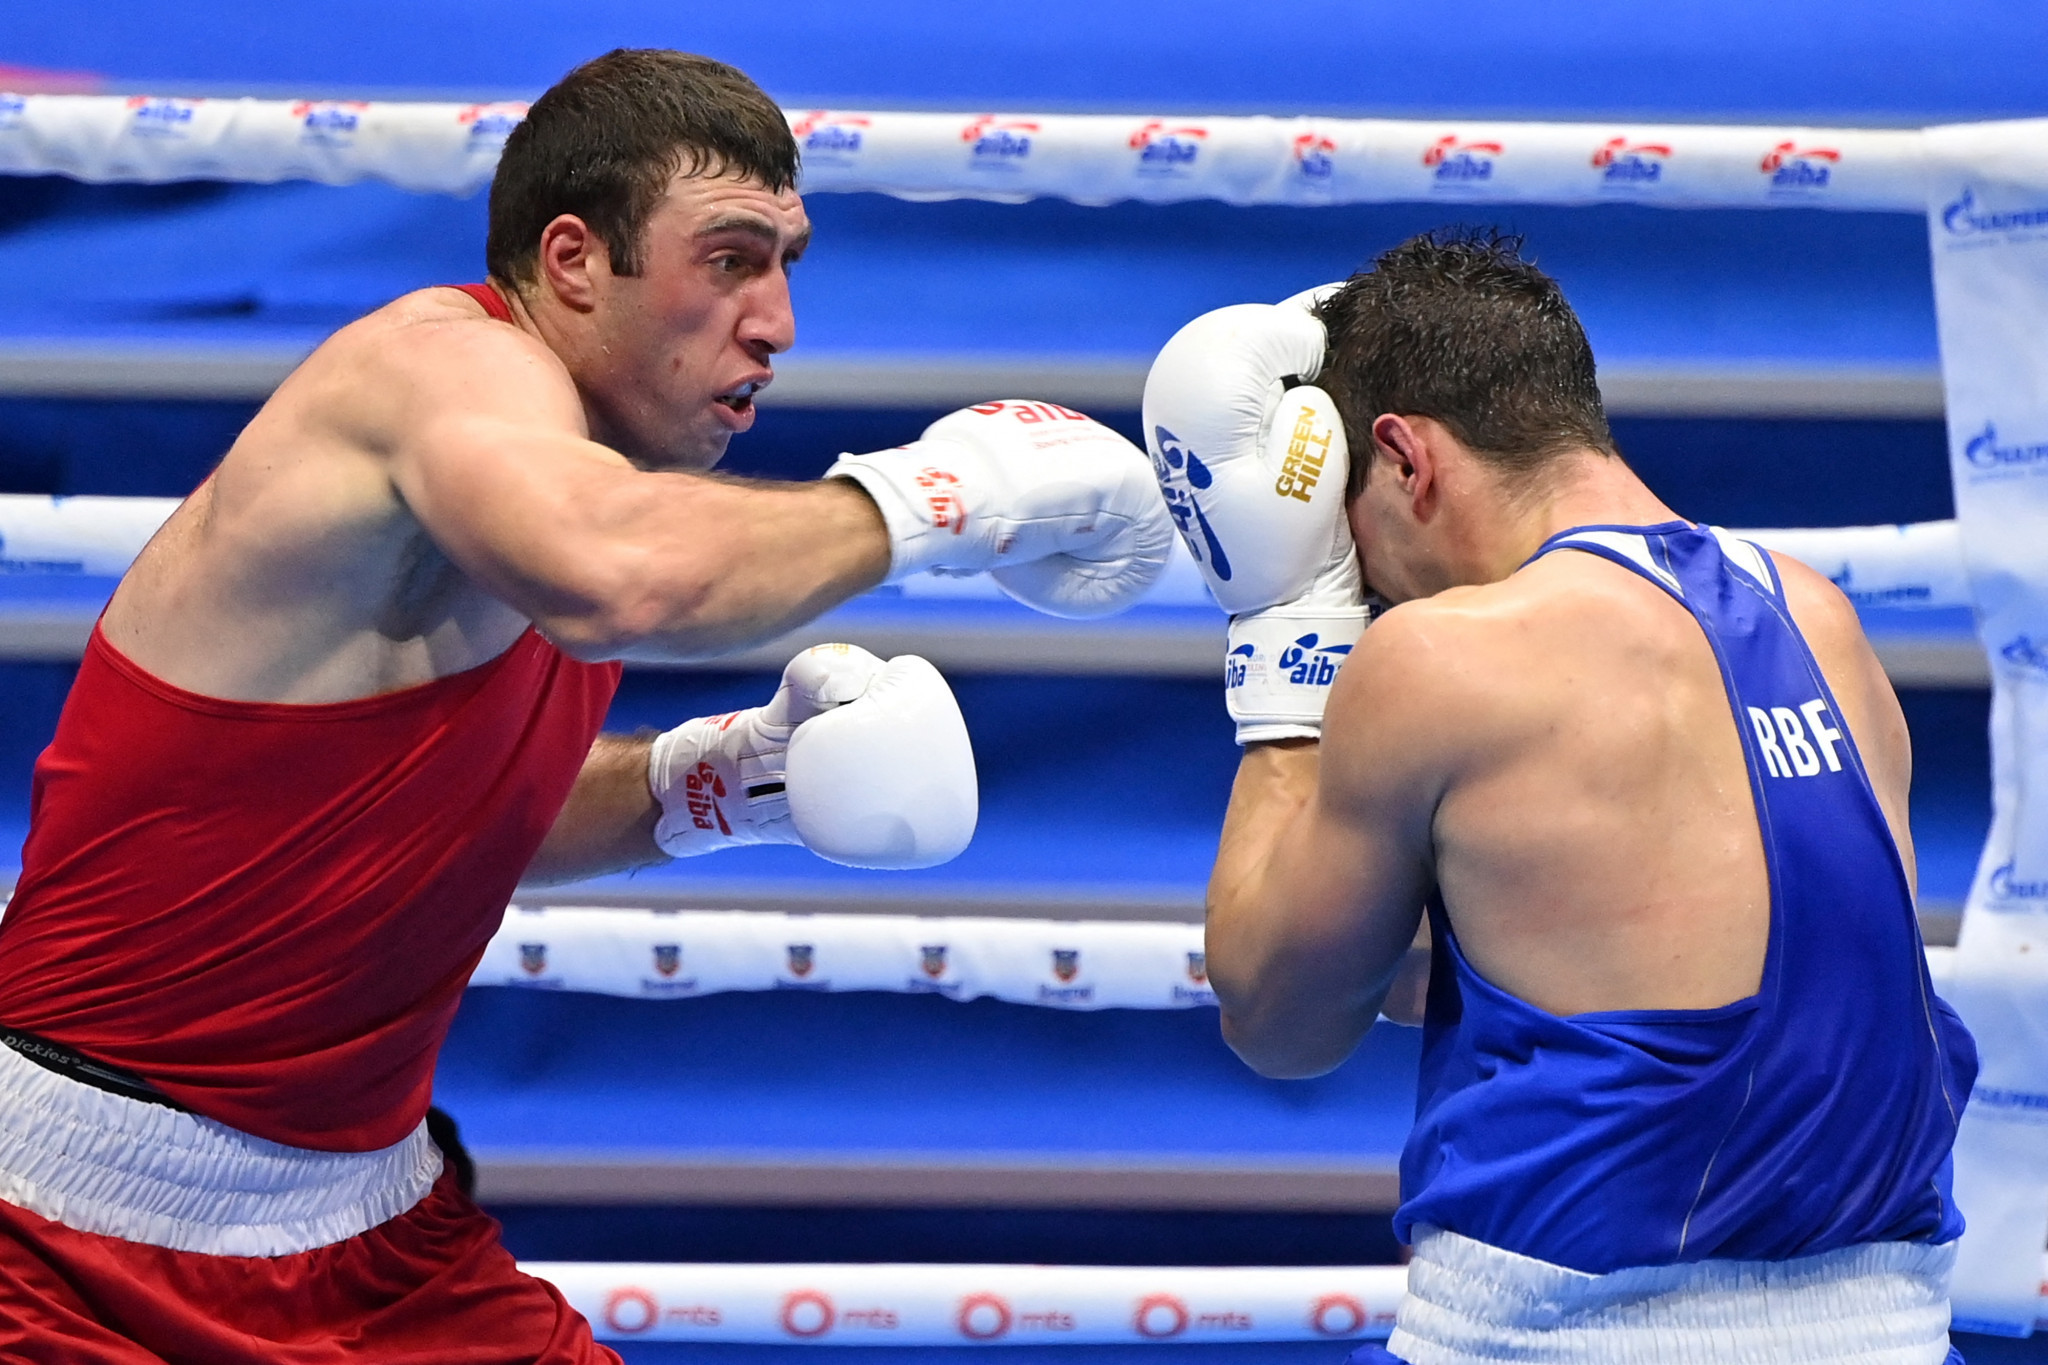 Home fans protested during the quarter-final bout involving Davit Chaloyan, left, at the European Men's Elite Boxing Championships in Yerevan, Armenia ©Getty Images